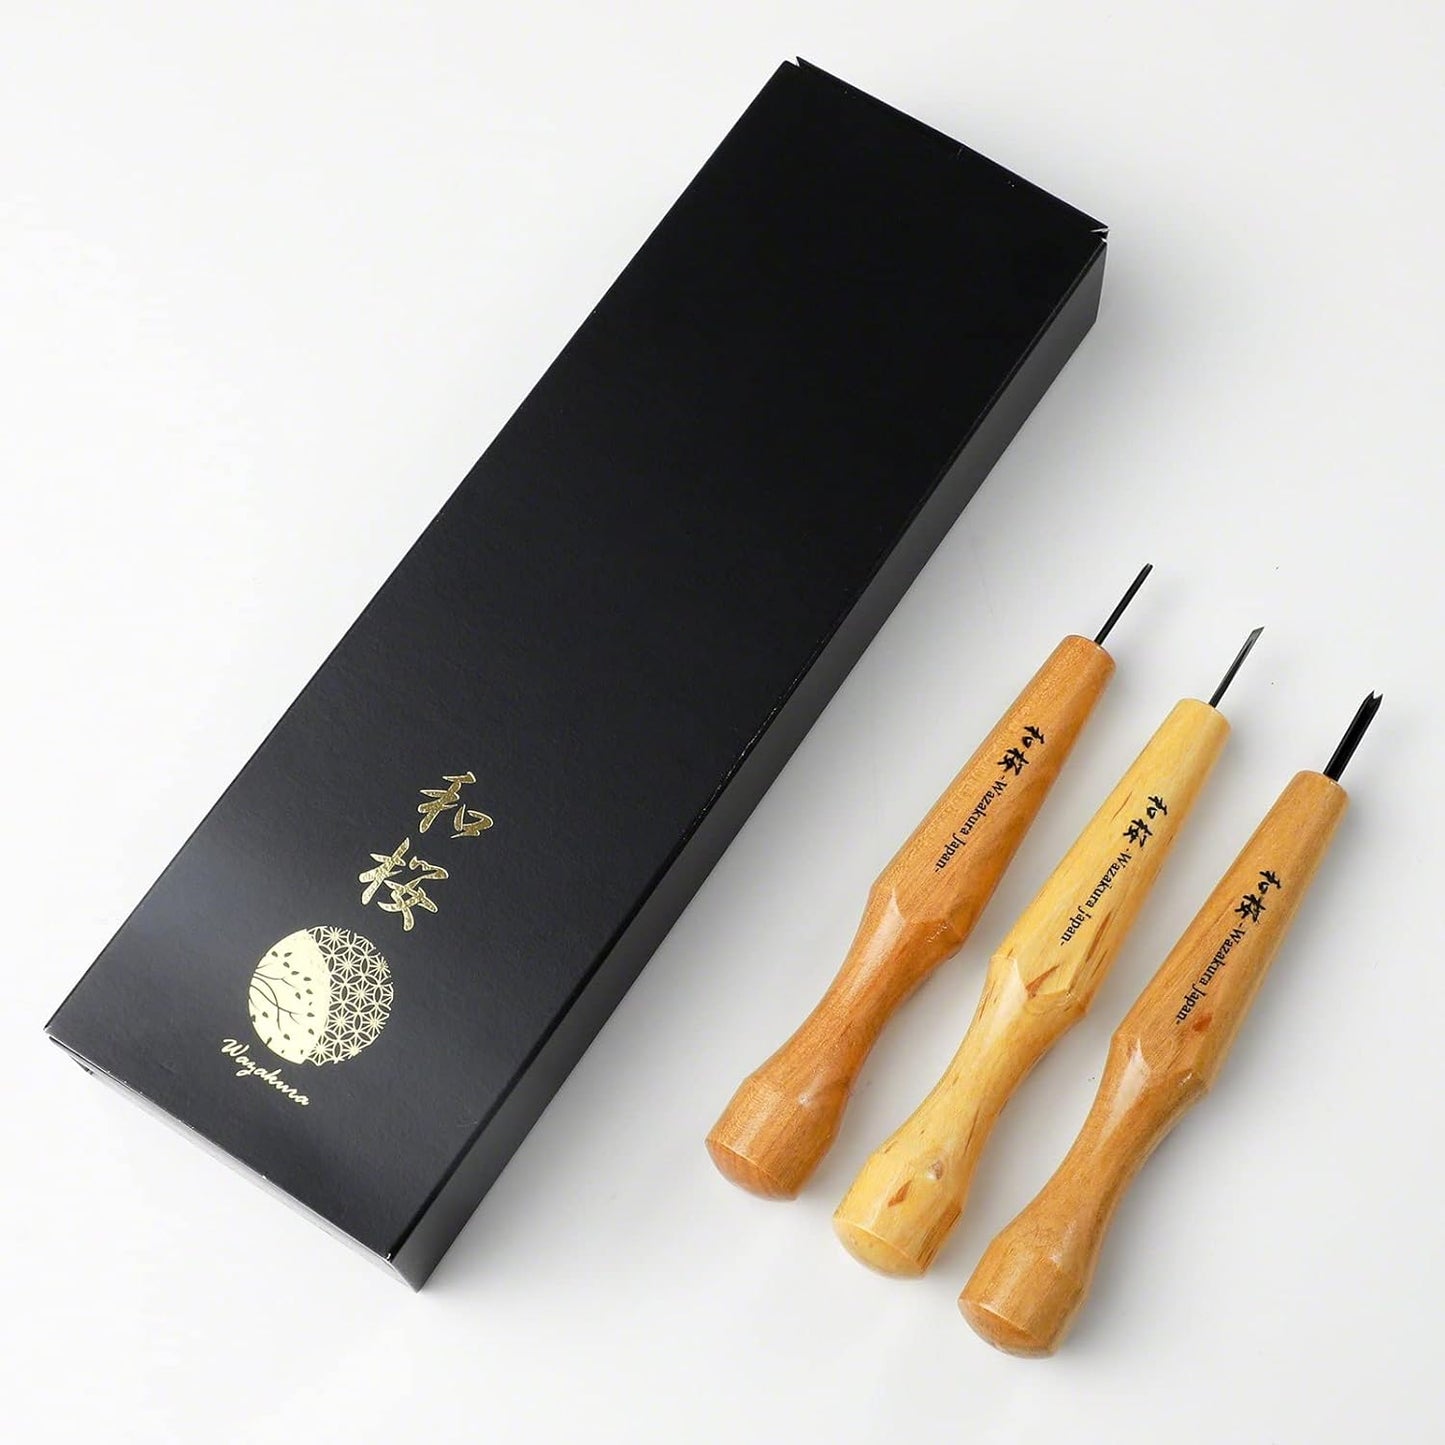 3PCS Bonsai Chisel Kit with round Gouge, Single Bevel Skewed and V-Parting Tool, Hand Carving Tool Set for Jin Shari Making, Woodworking Knife Pack (3PCS Bonsai Chisel Kit, Mini Size)